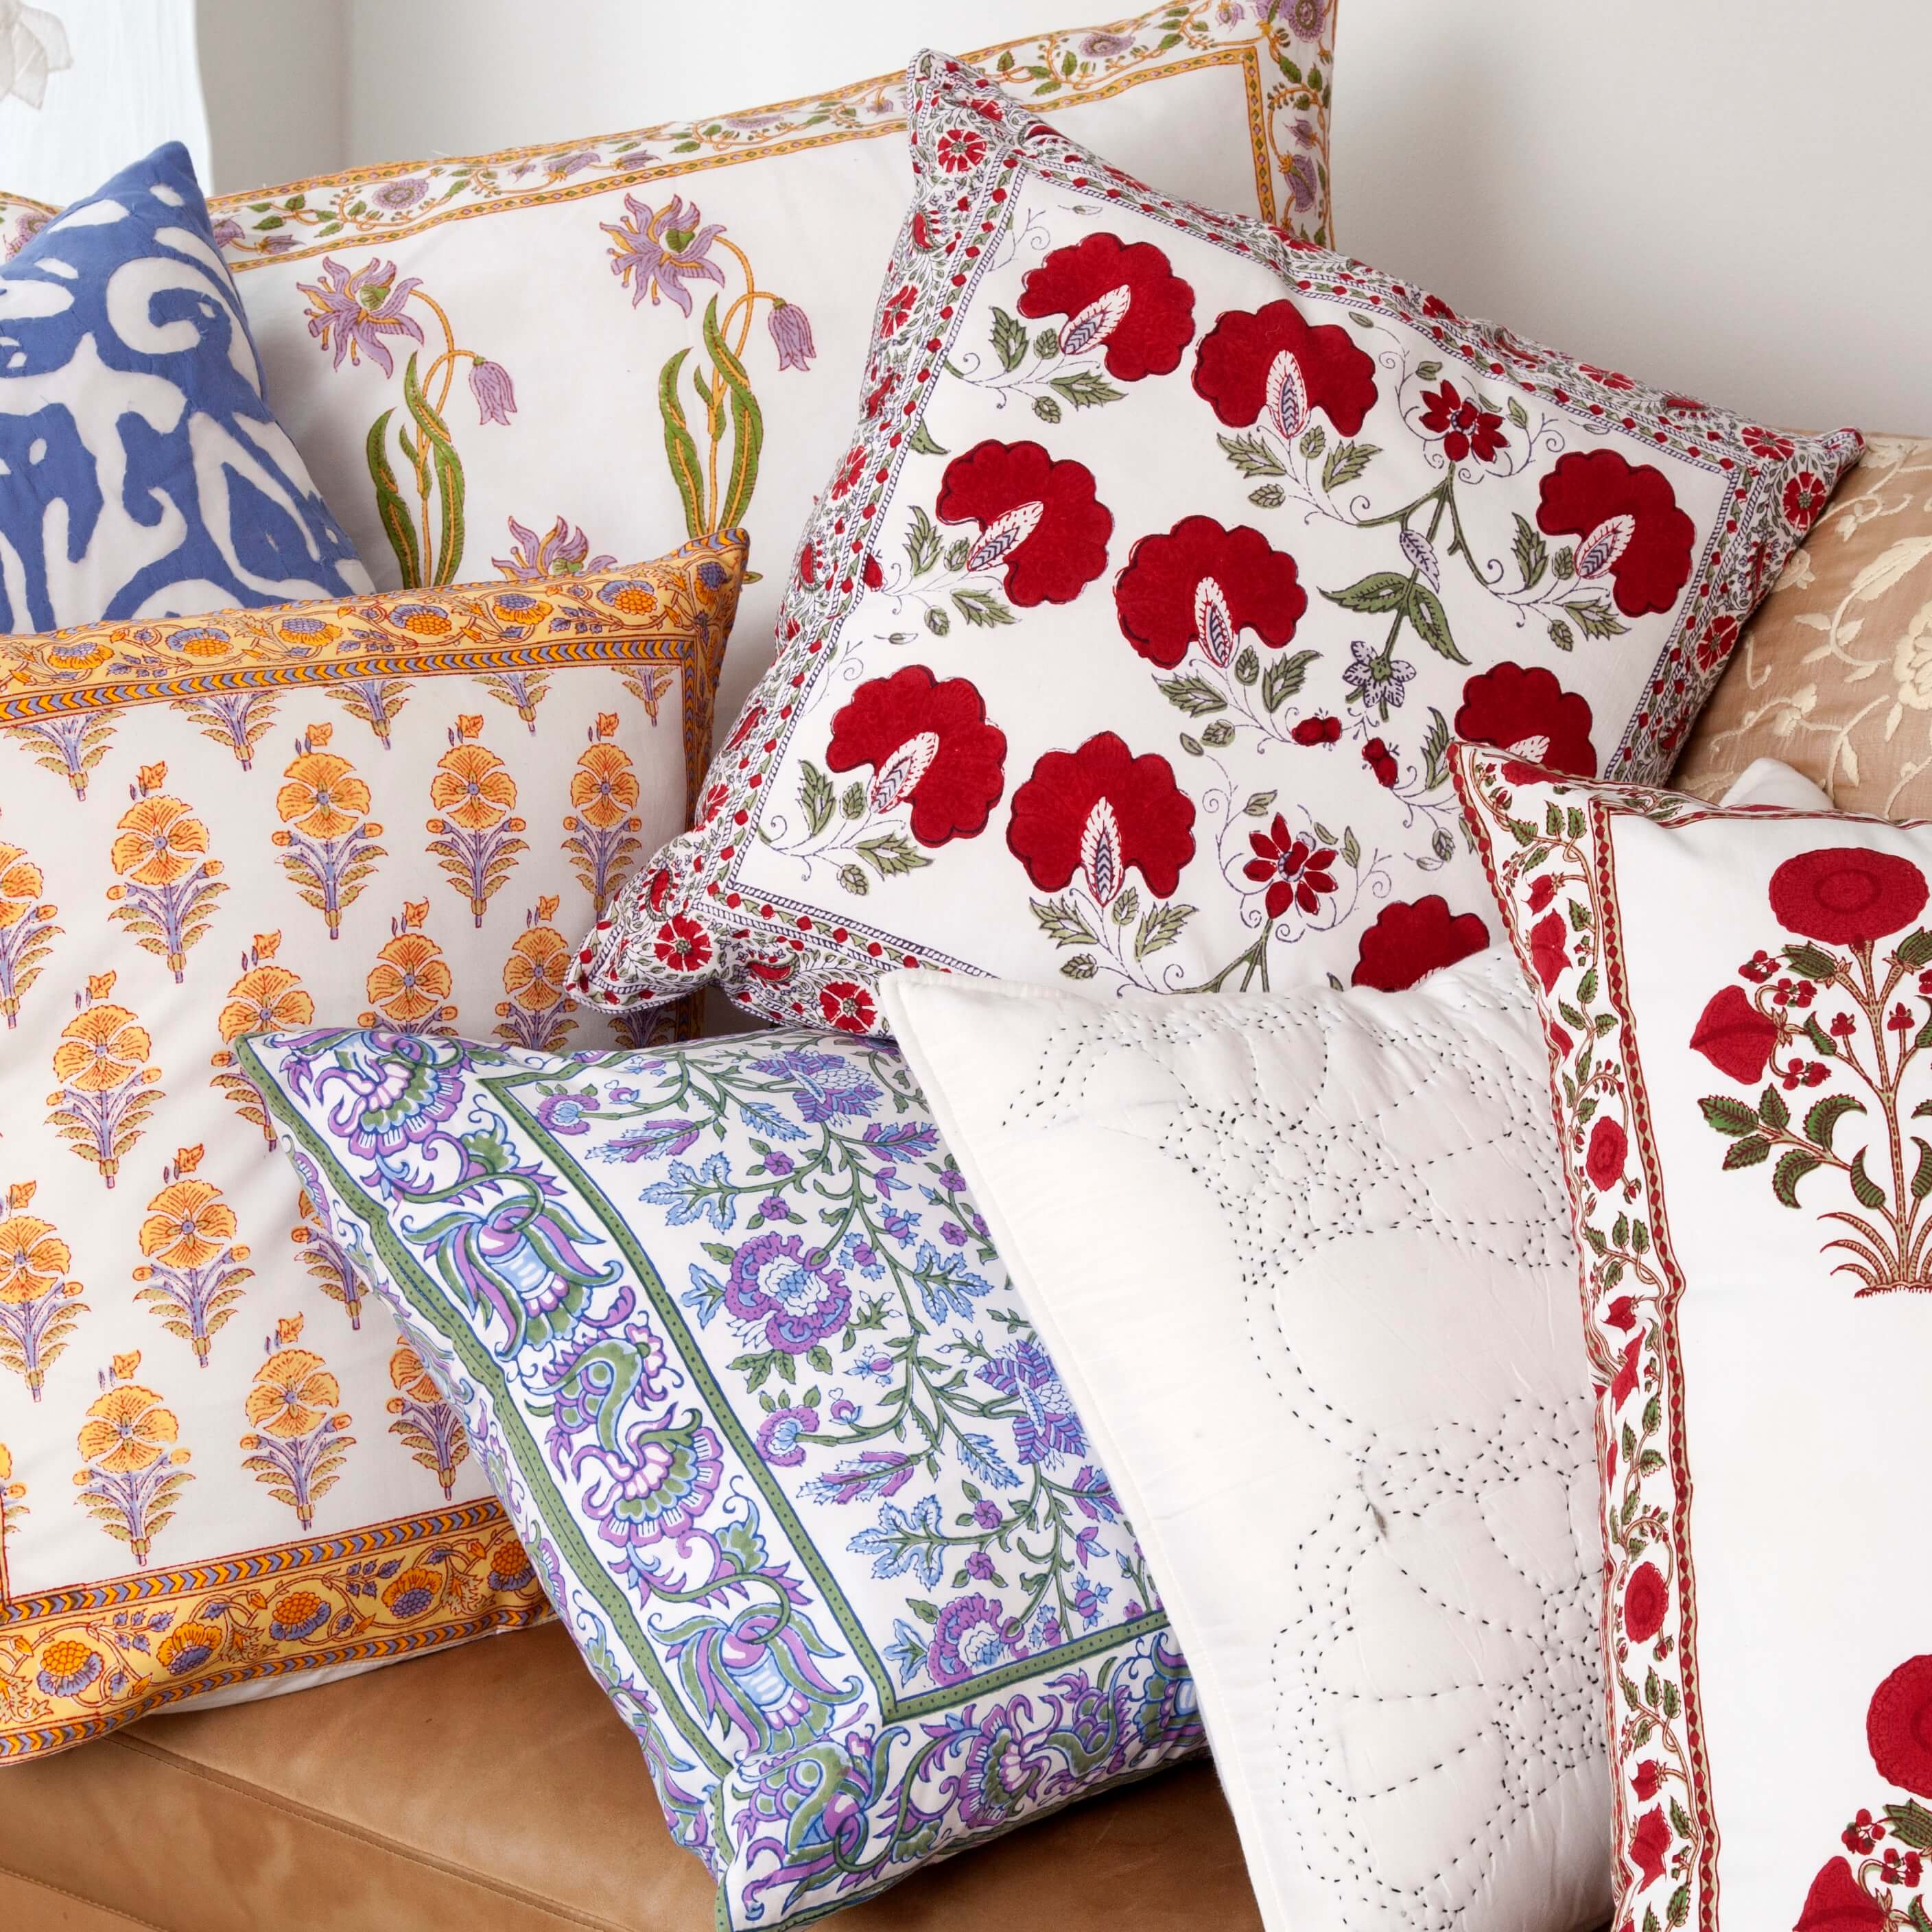 Handcrafted In India Throw Pillows